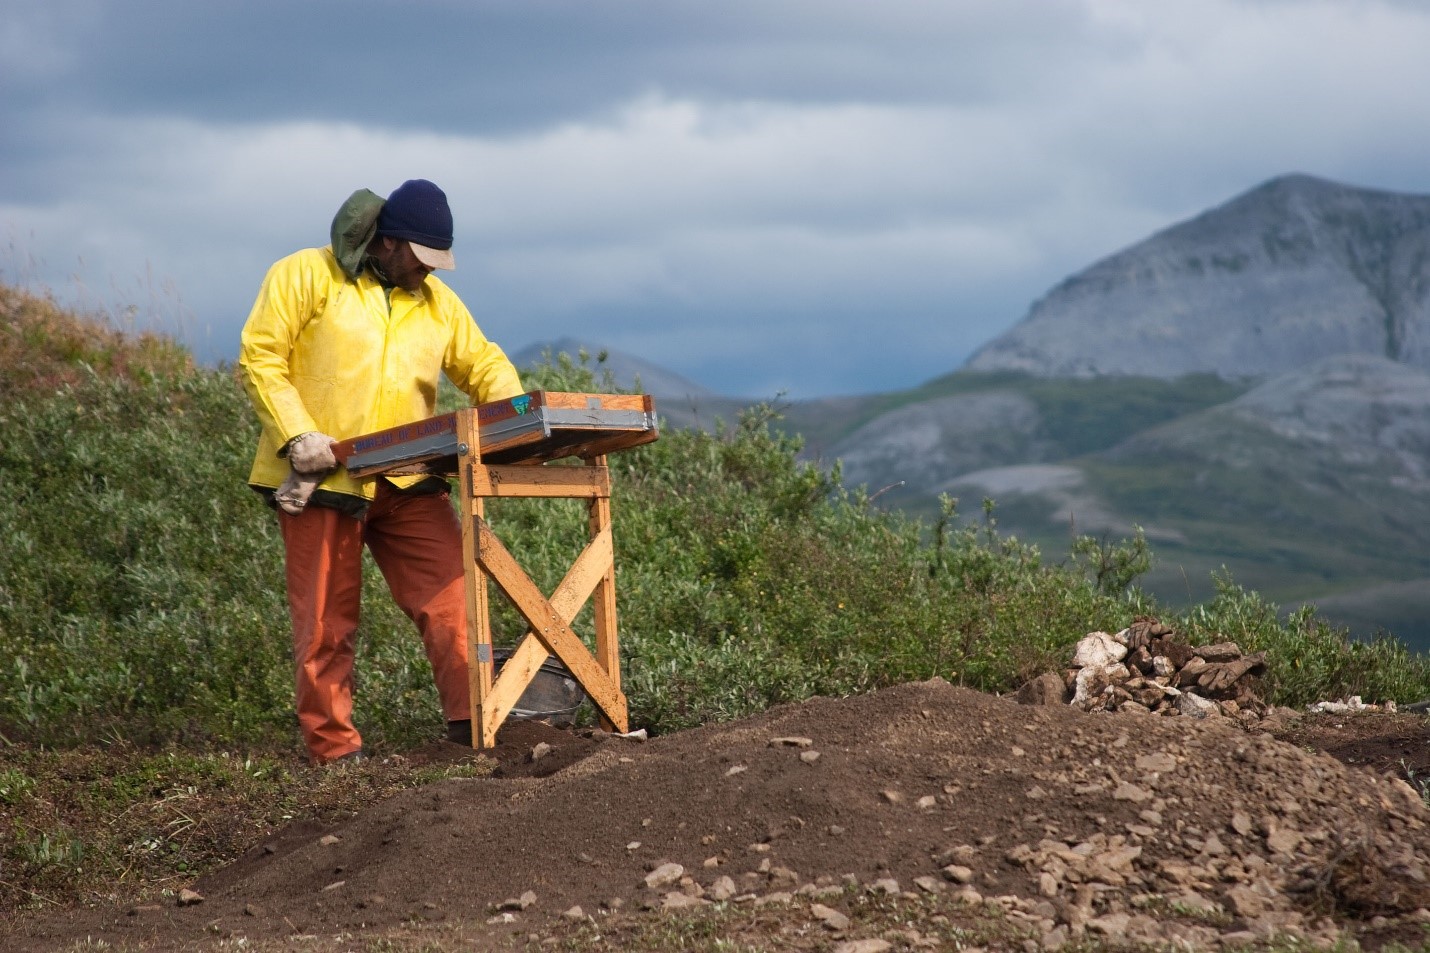 Man on a hilltop works behind a wooden table with mountains in the background.